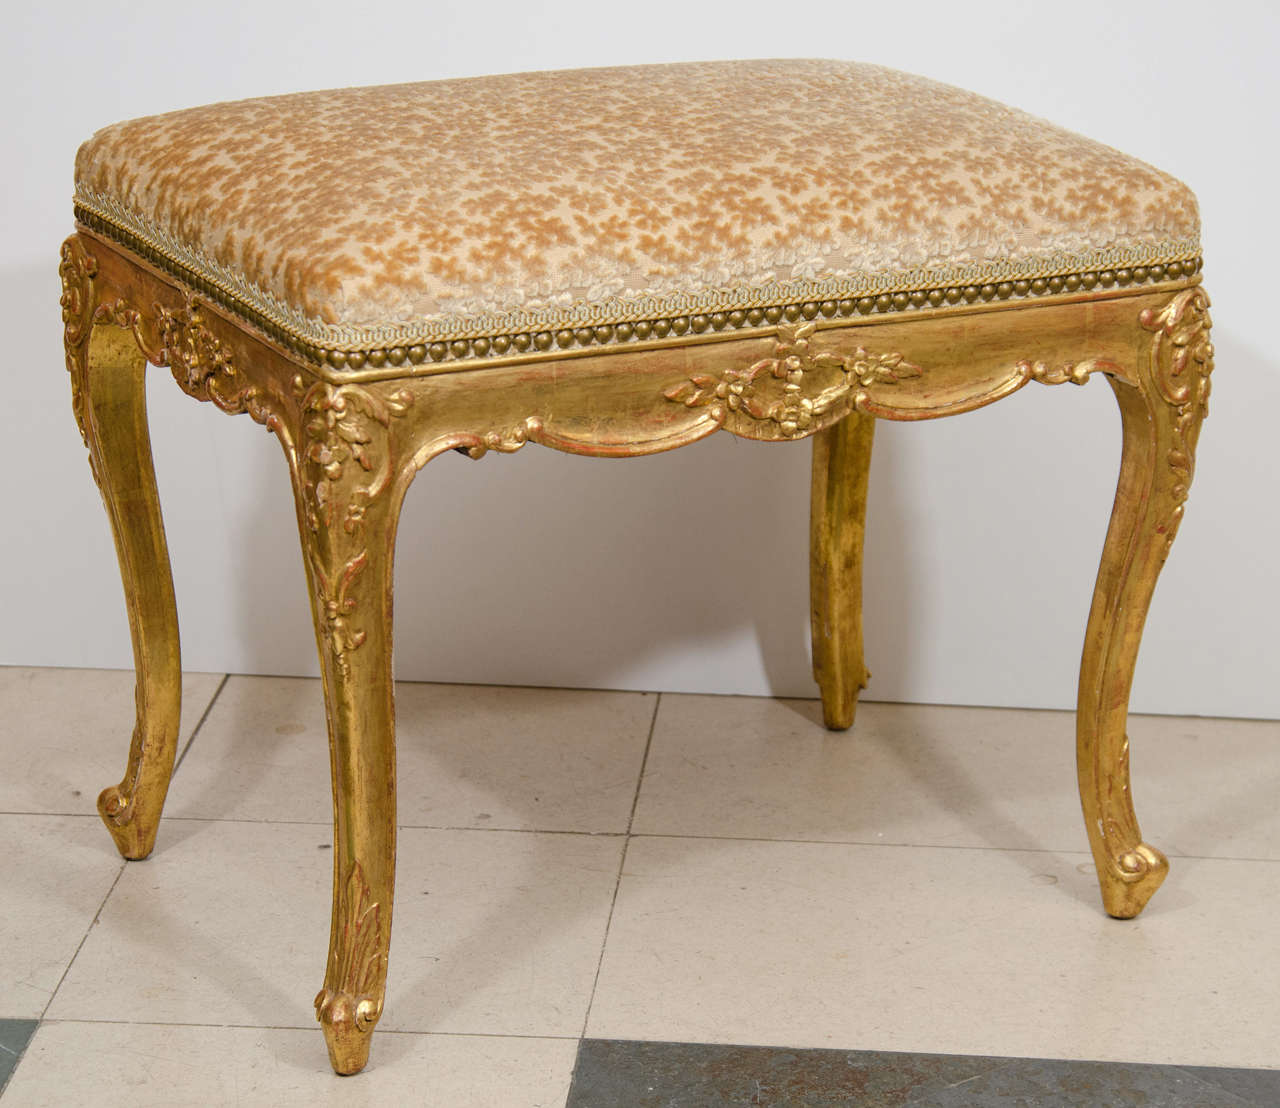 A pair of Louis XV carved gilt wood and upholstered stools.